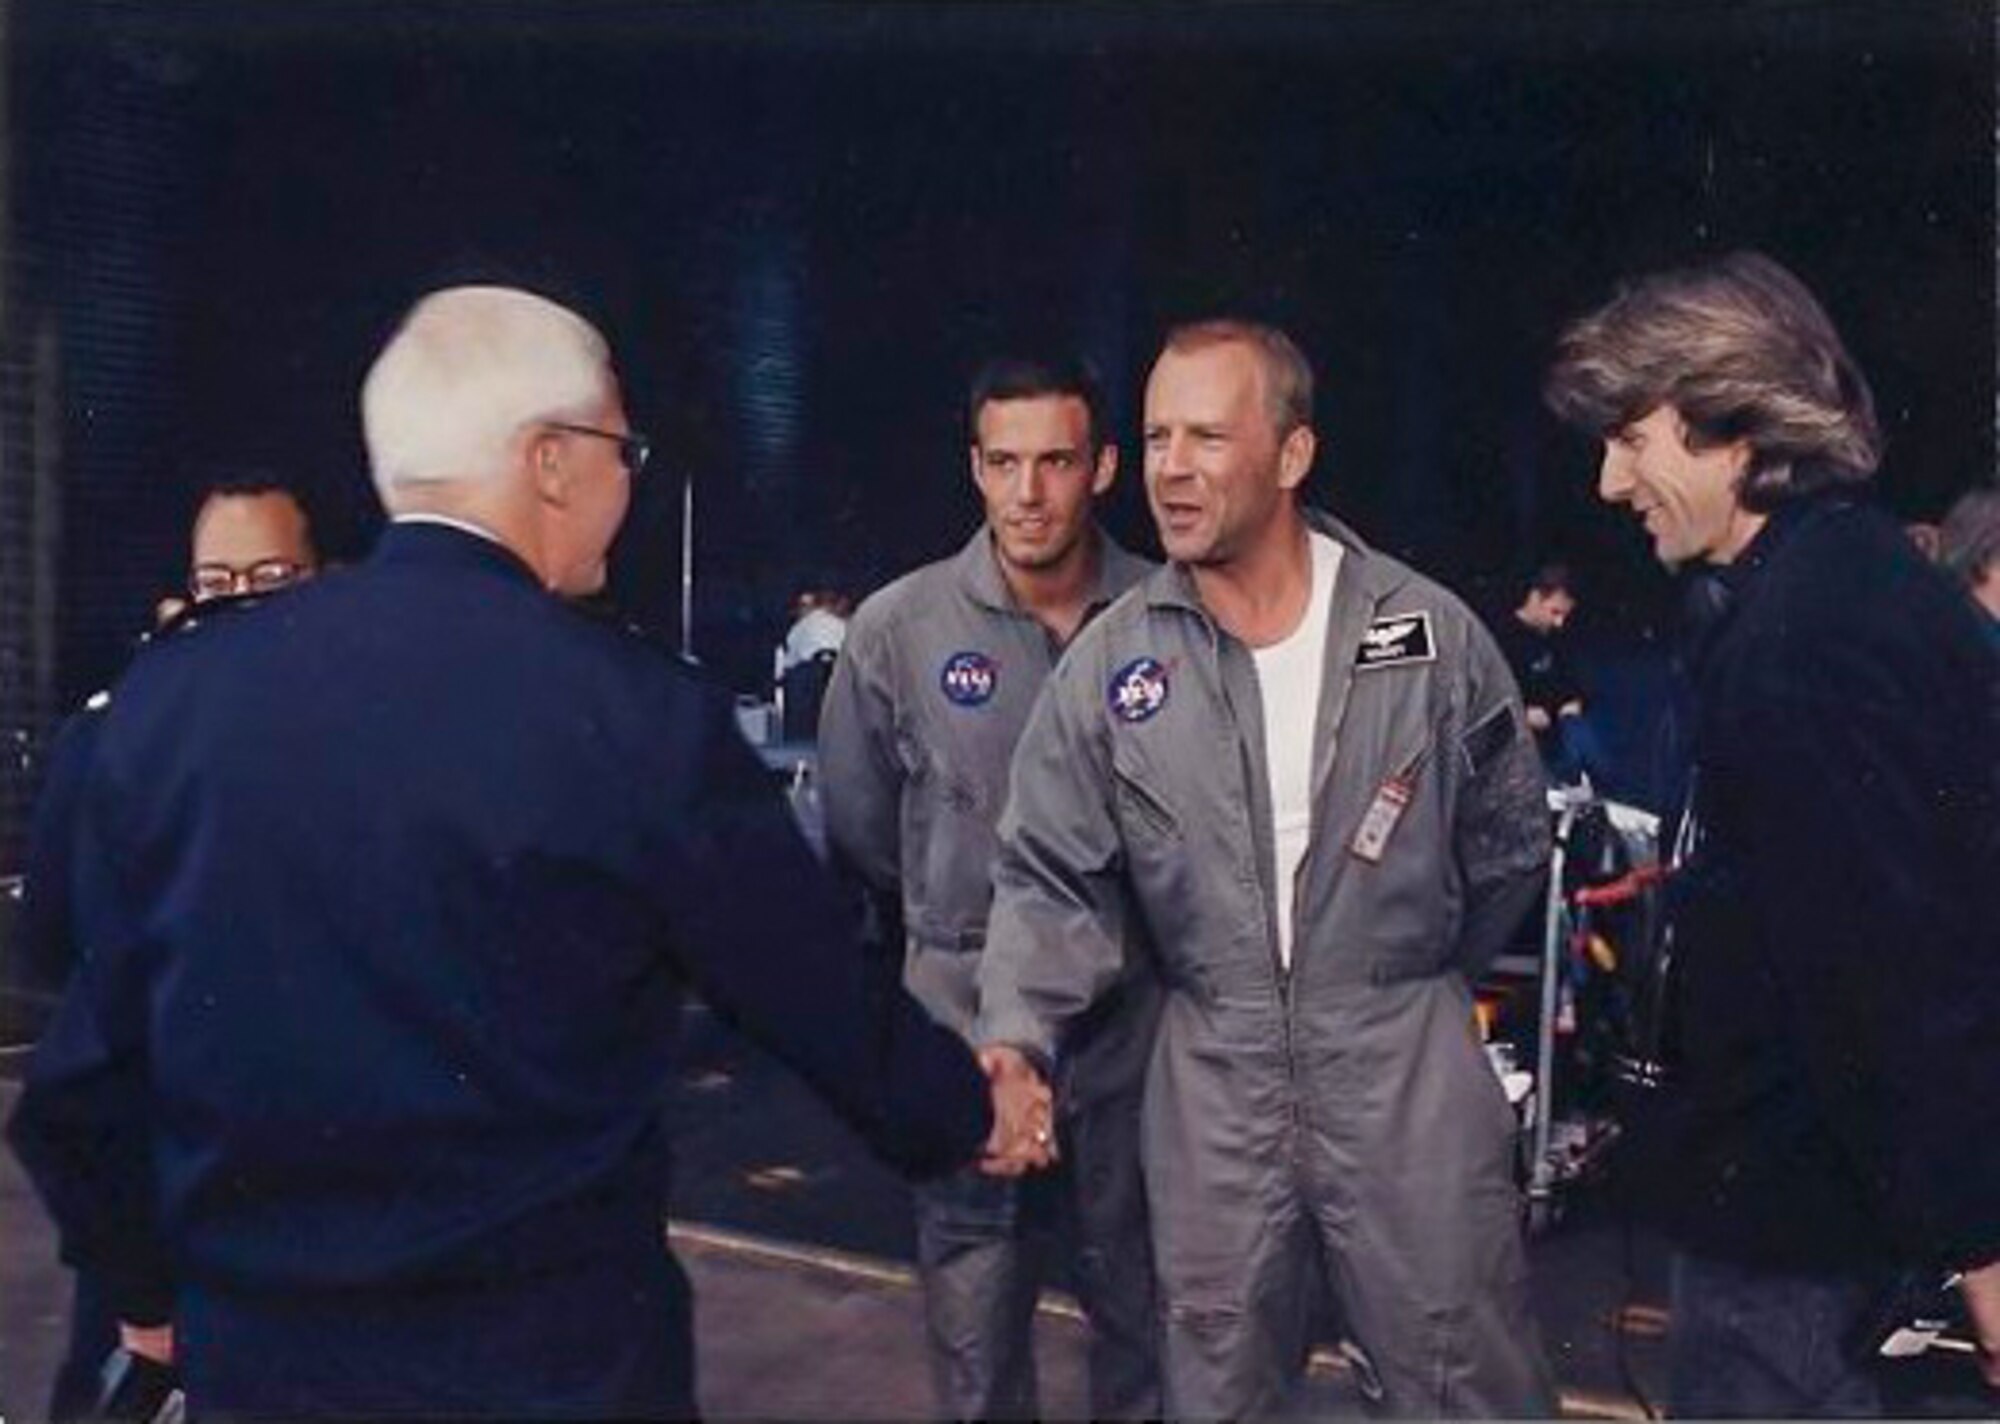 Actors Ben Affleck and Bruce Willis and director Michael Bay meet Maj. Gen. (retired) Richard Engel, then commander of the Air Force Test Center, during filming of the movie "Armageddon" at Edwards Air Force Base, California. (Photo courtesy of Air Force Test Center History Office)